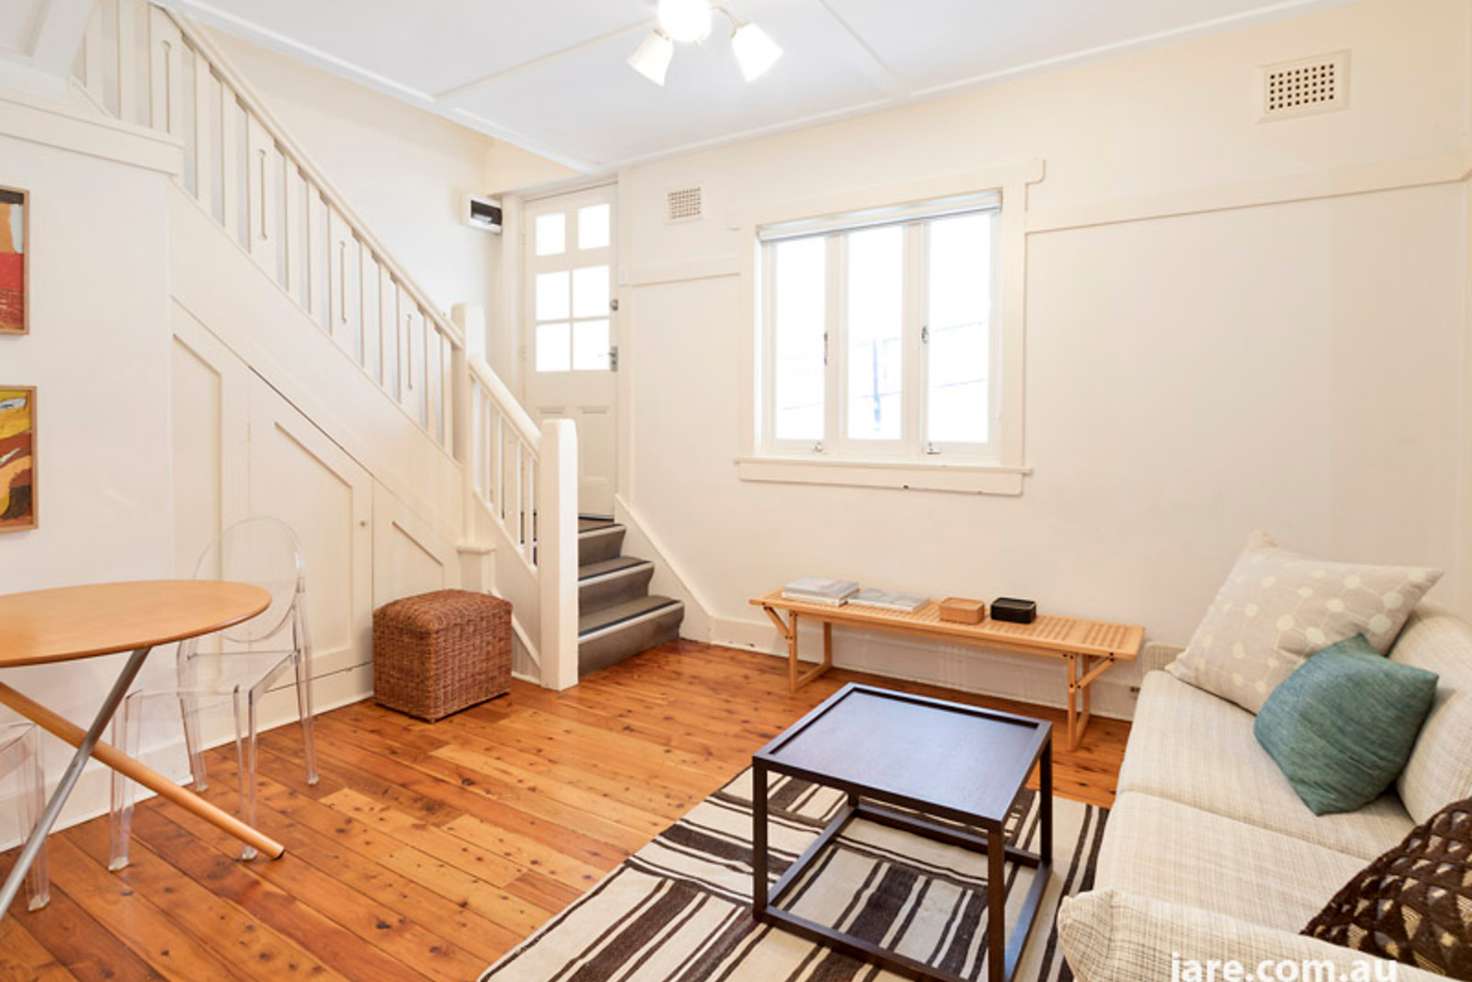 Main view of Homely apartment listing, 1/100 Dudley Street, Coogee NSW 2034